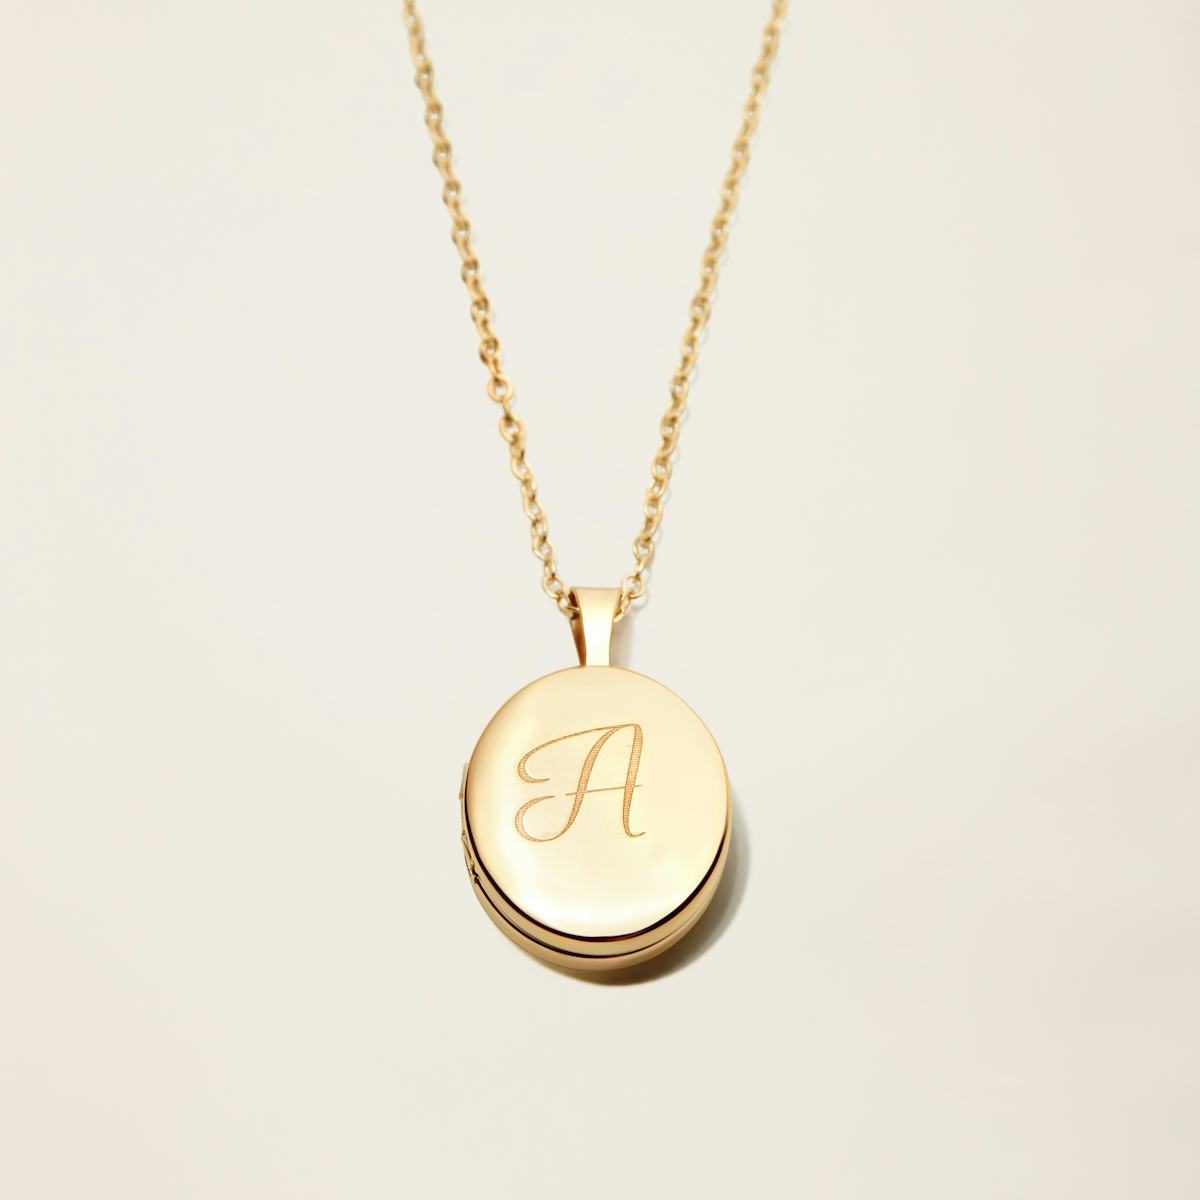 Gold Engraved Initial Locket Necklace_Yellow Gold_Jewelry_Product_1x1_A_0369_Edited.jpg